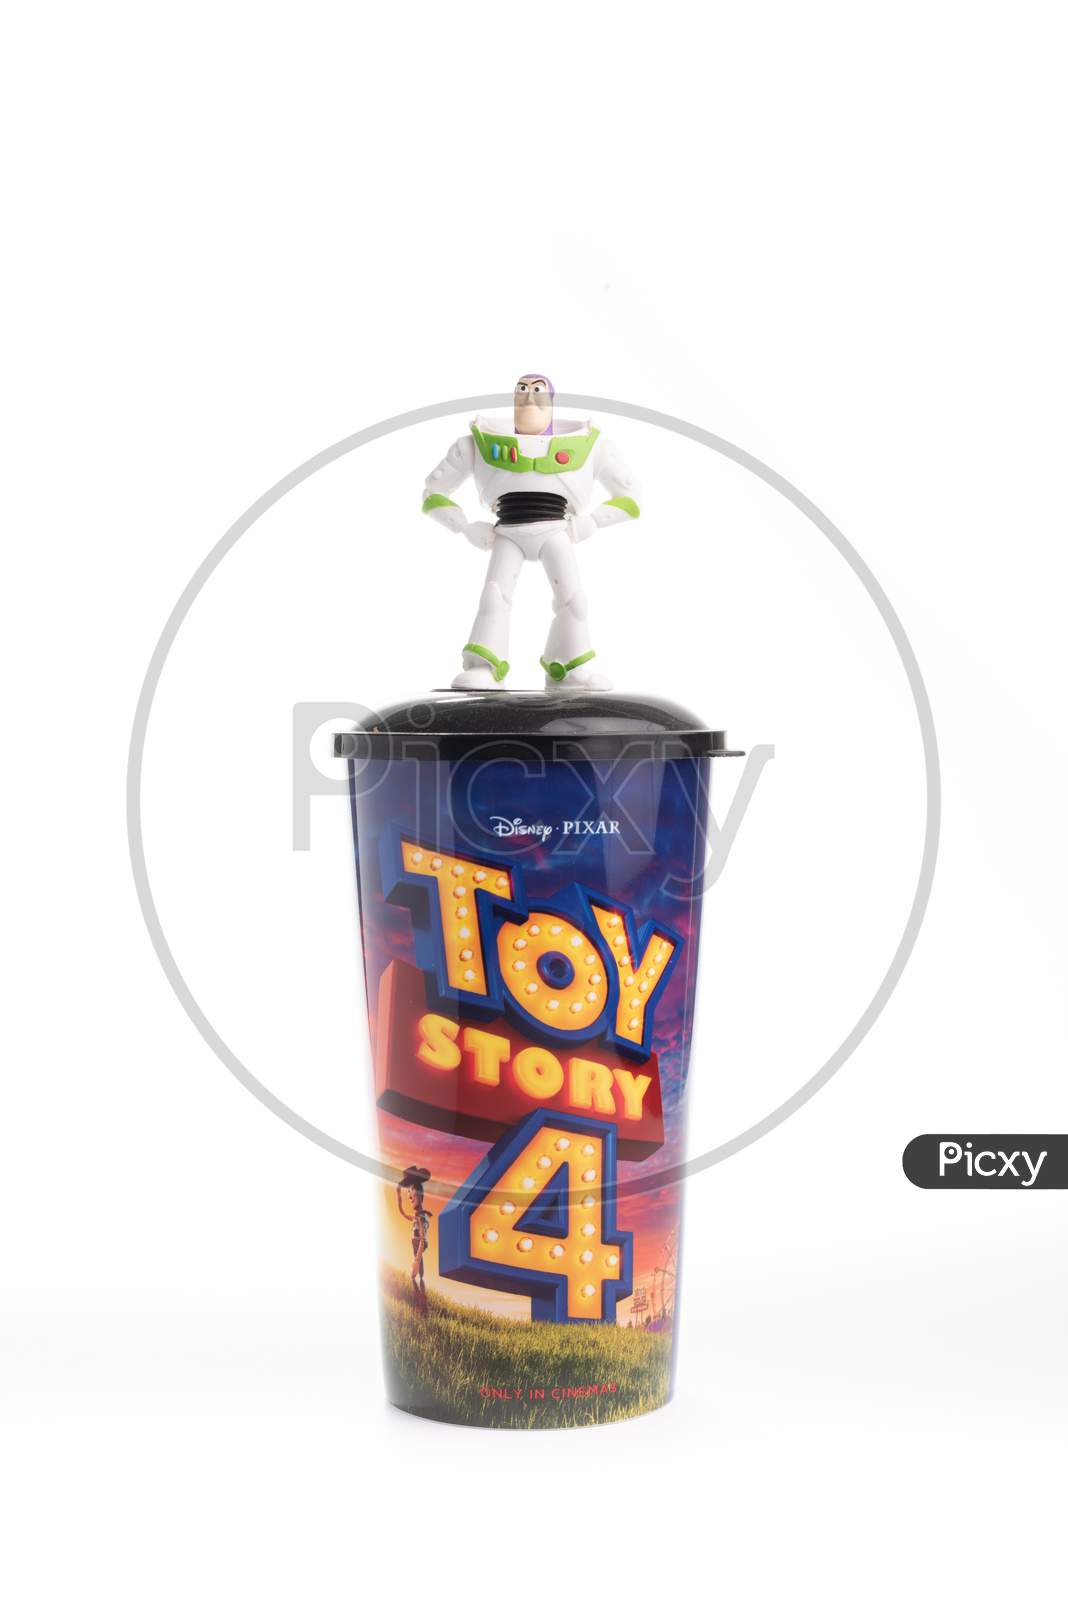 Kuala Lumpur/Malaysia - May 19 2019: Toy Story 4 Cup From The Cinema Promotion On The White Background